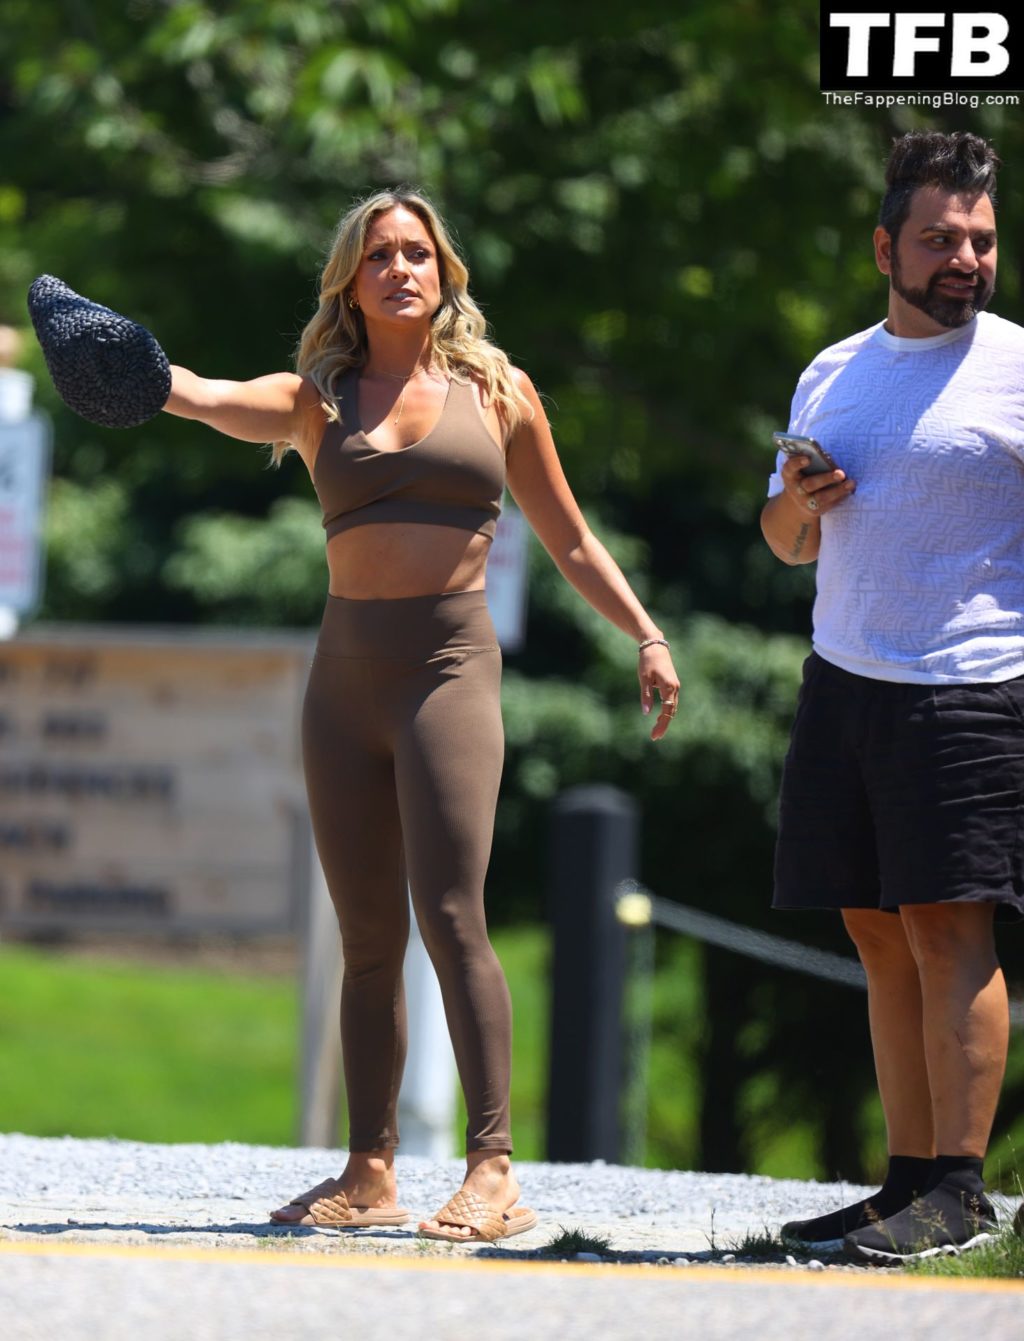 Kristin Cavallari Sexy The Fappening Blog 25 1 1024x1341 - Kristin Cavallari Shows Off Her Abs While Wearing a Brown Athleisure Outfit in East Hampton (47 Photos)